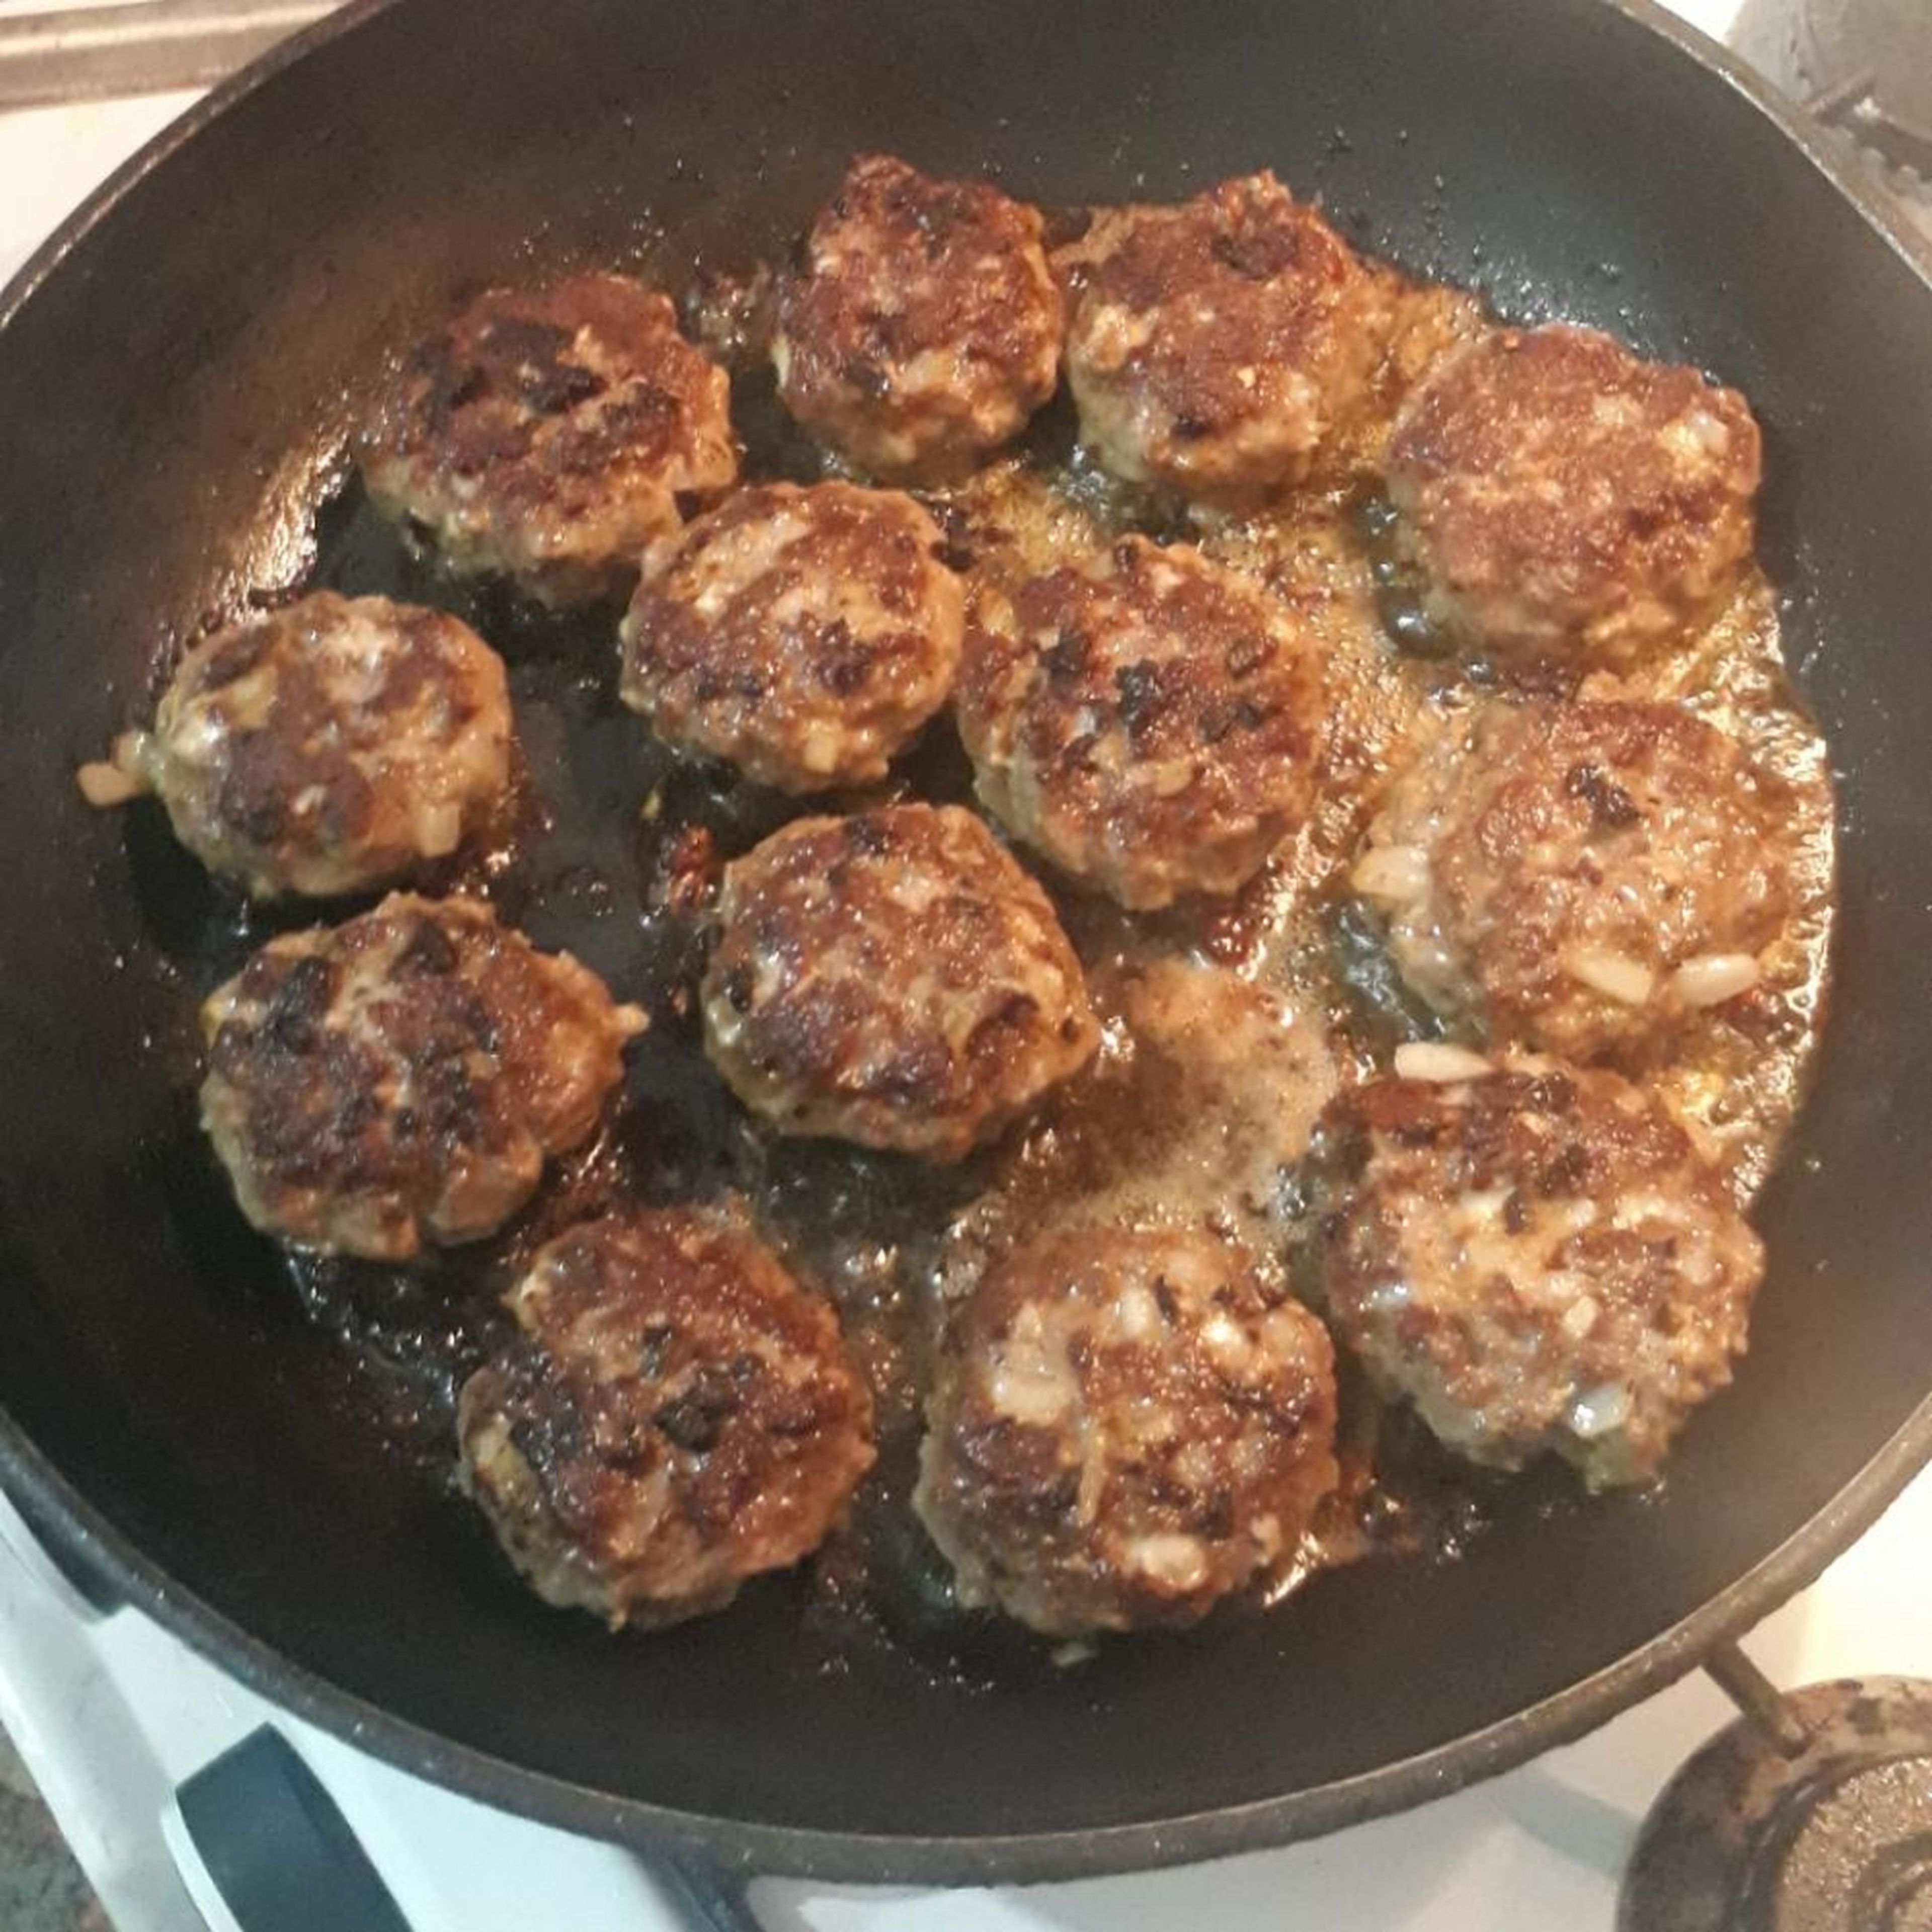 When both sides of meatballs are turn dark brown you can put away them.